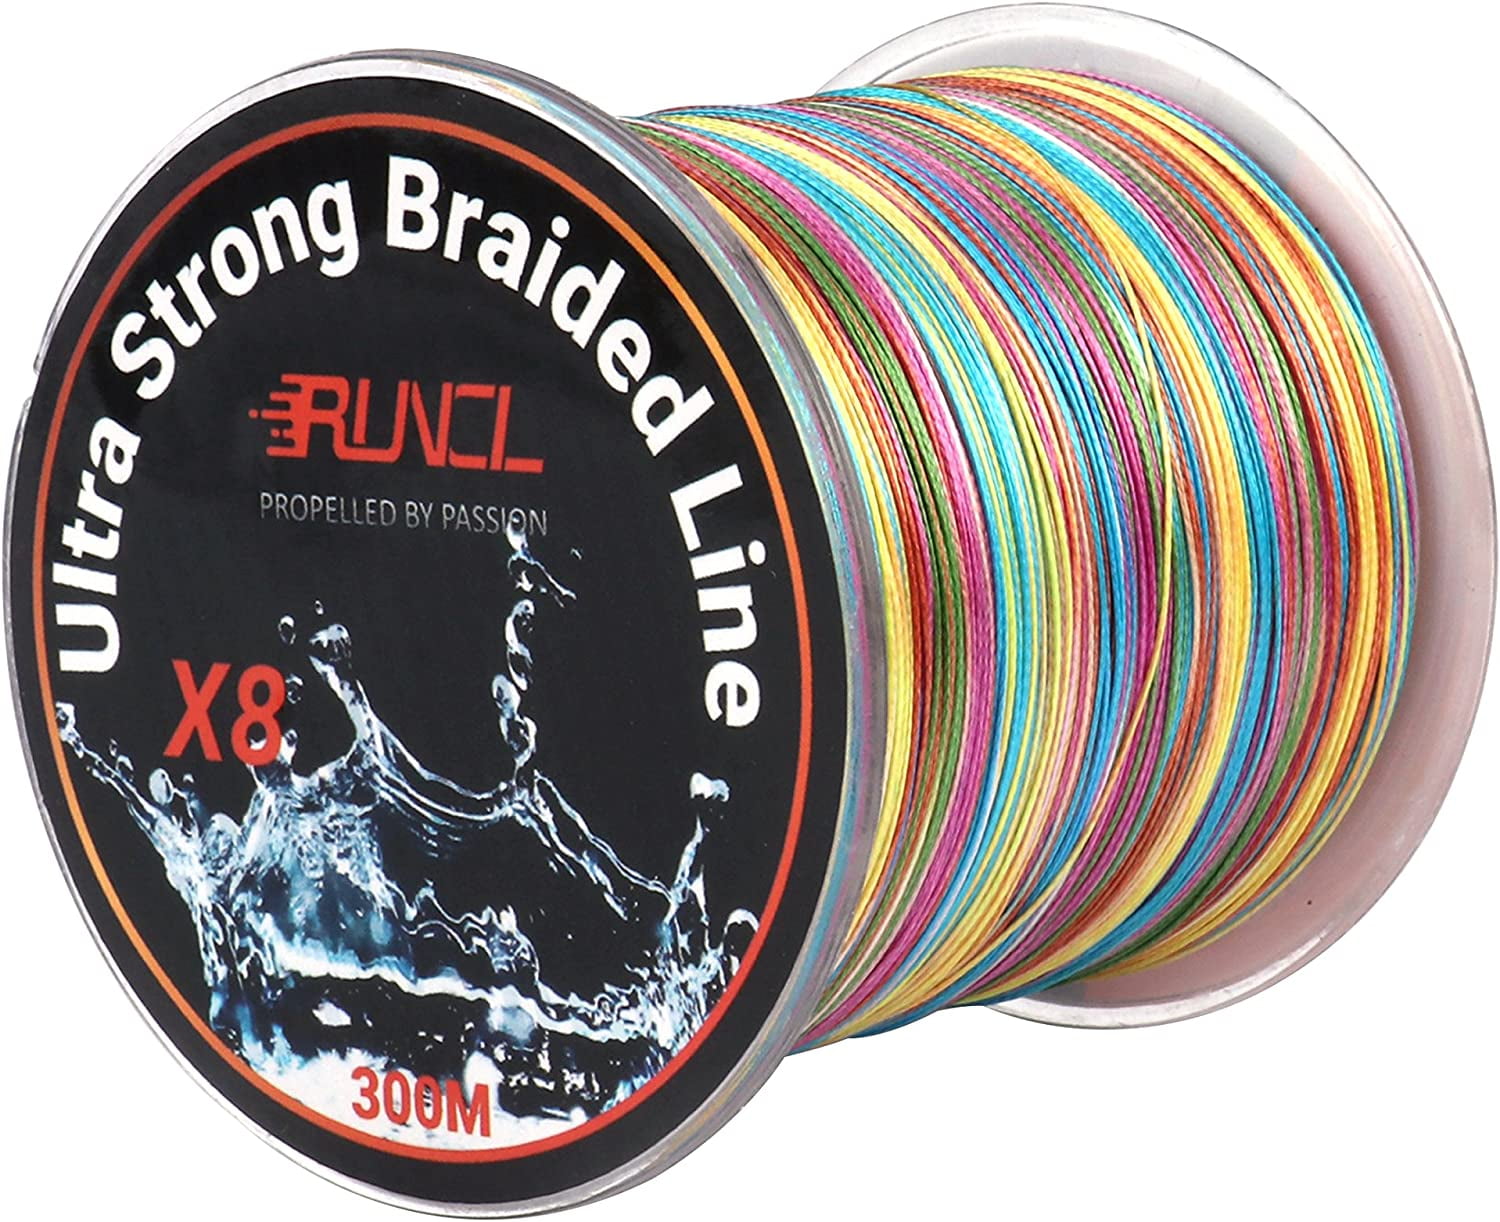 RUNCL Braided Fishing Line, 8 Strand Abrasion Resistant Braided Lines, Super  Durable, Smooth Casting, Zero Stretch, Smaller Diameter, Rainbow Color for Extra  Visibility, 328-1093 Yds, 12-100LB 